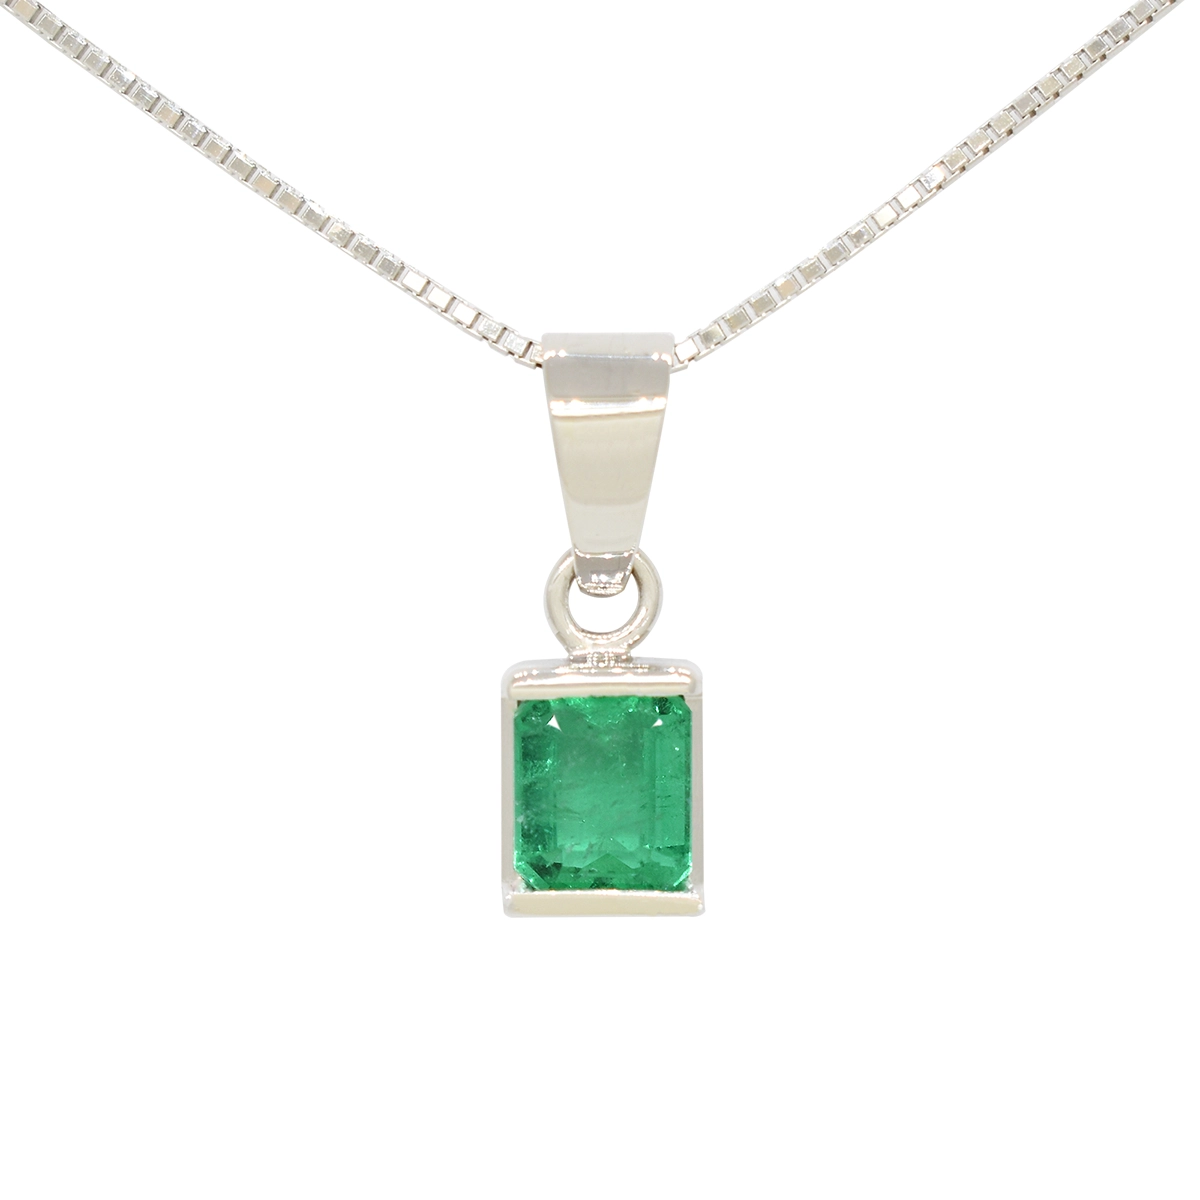 Emerald-cut natural Colombian emerald in 18K white gold pendant necklace half bezel solitaire style